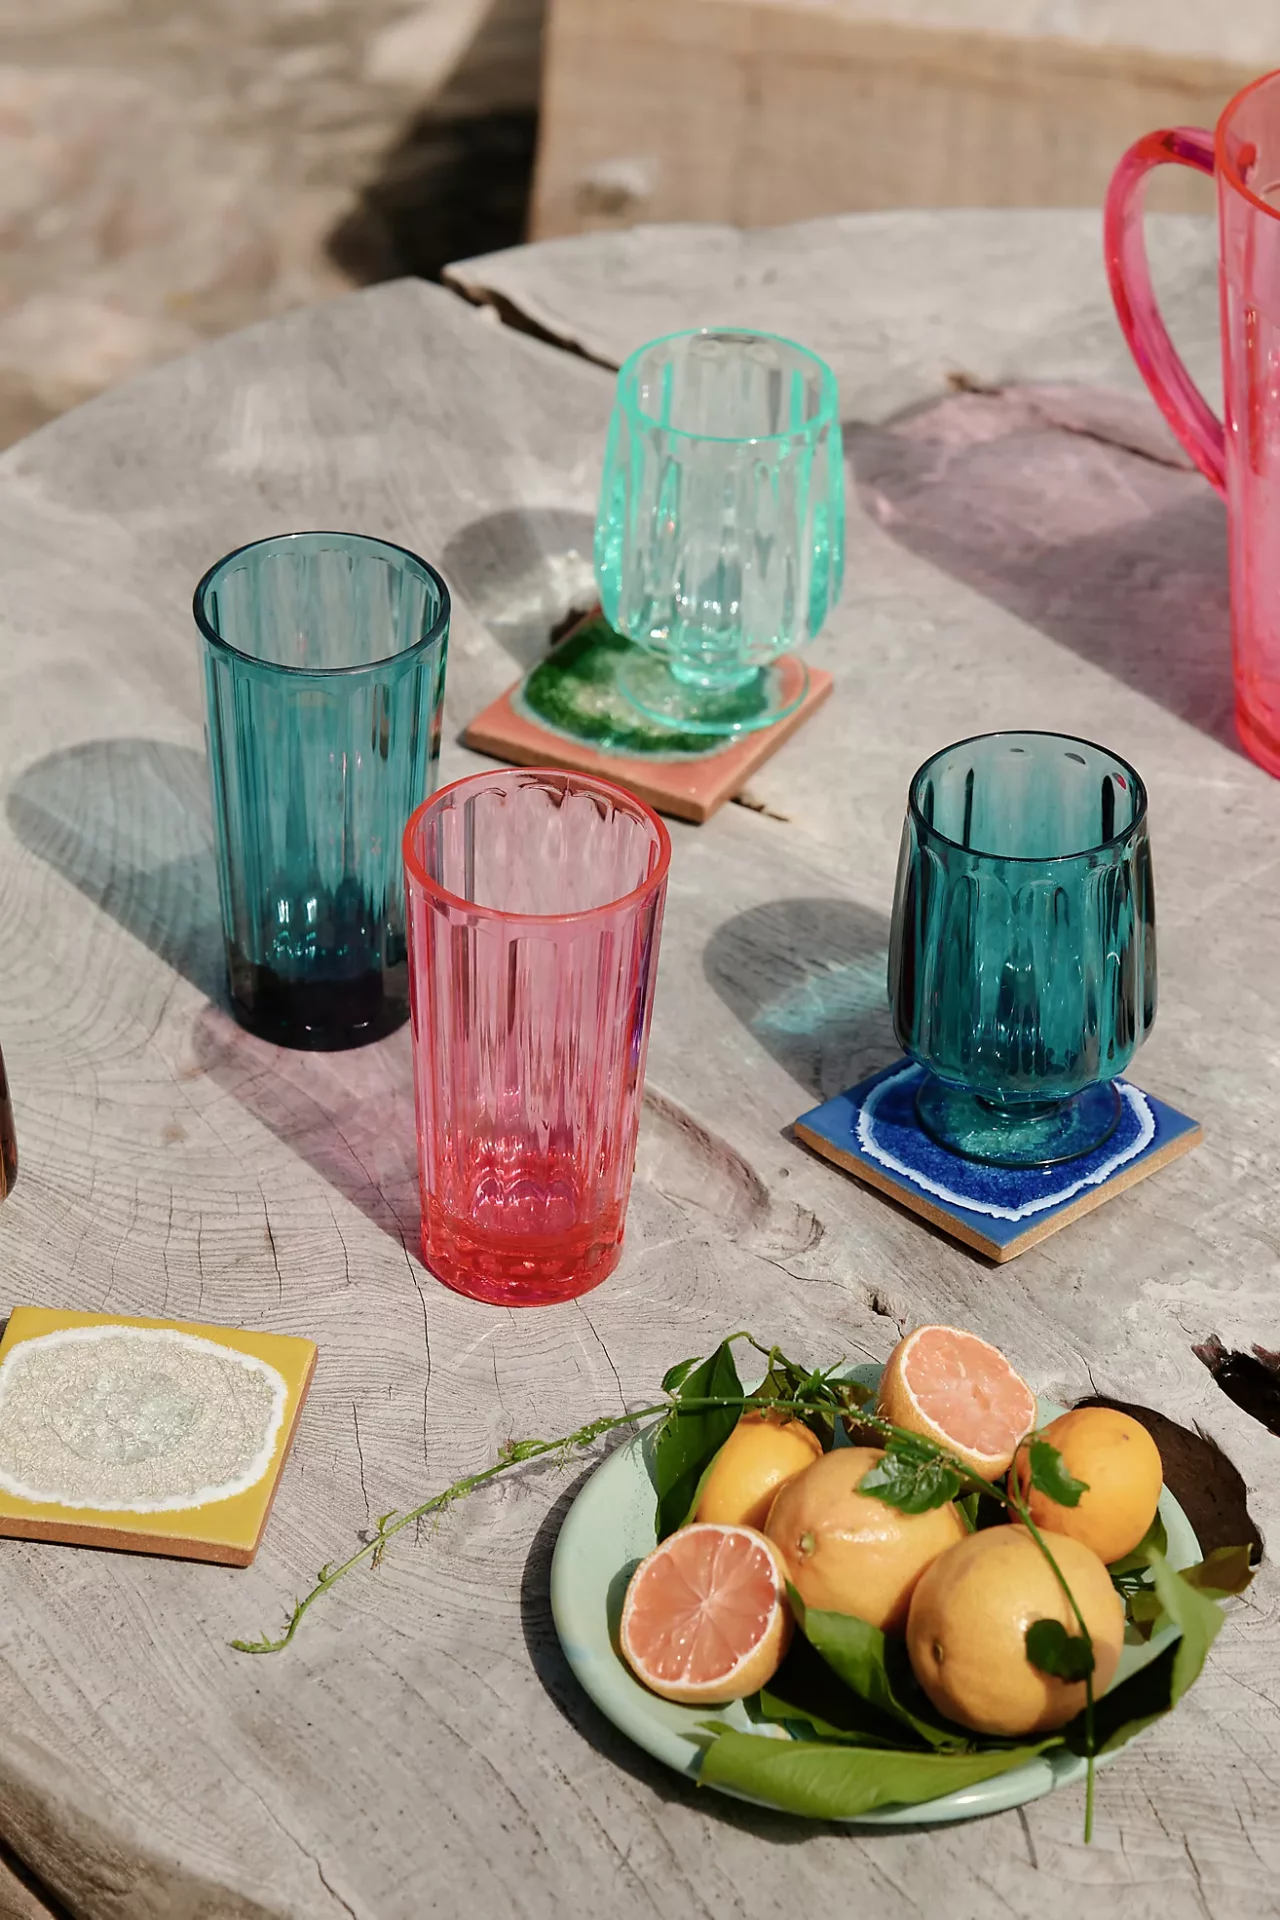 Outdoor dining experience with acrylic glassware